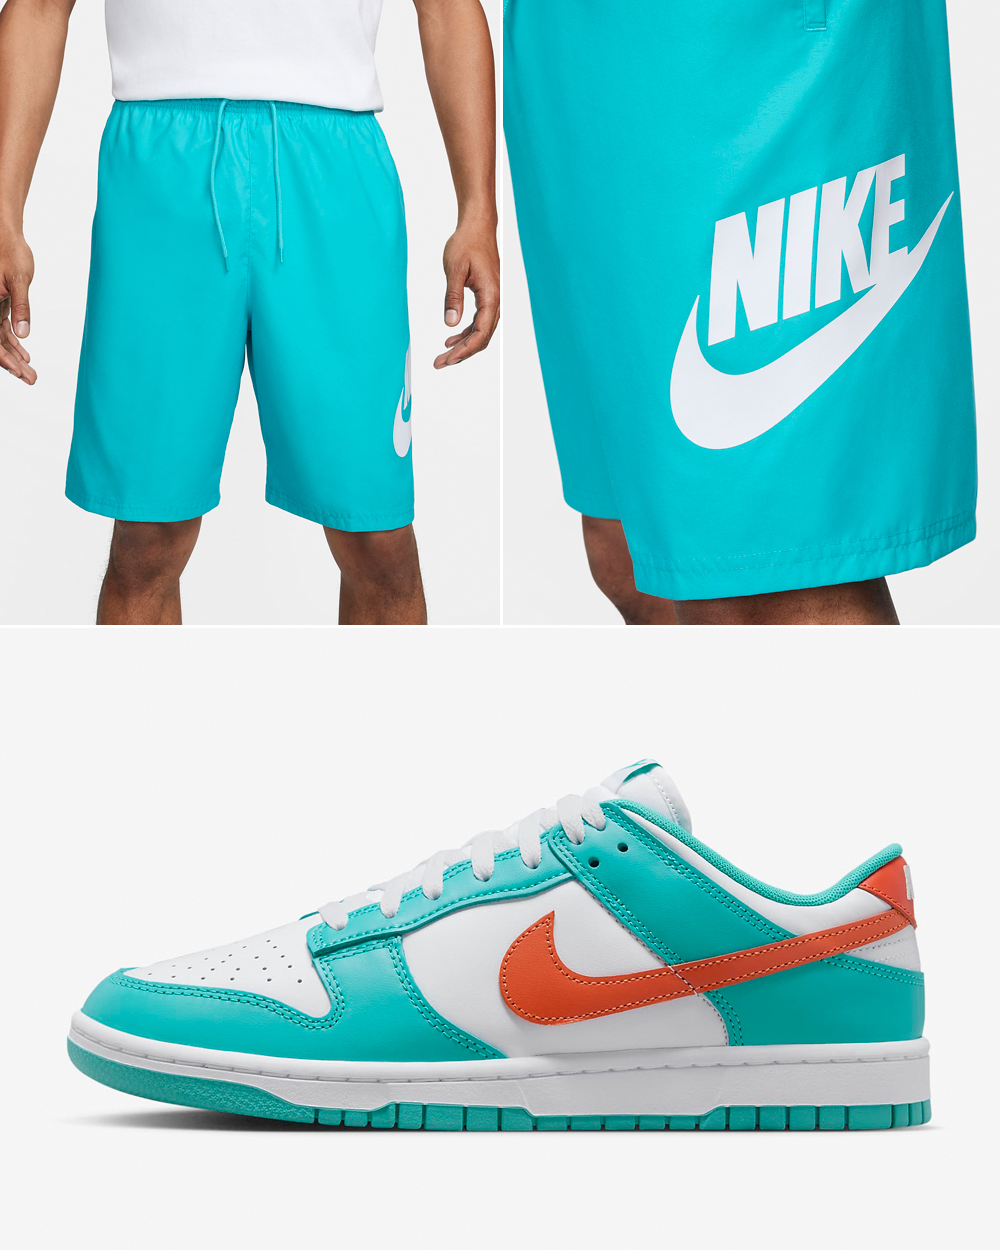 Nike-Dunk-Low-Miami-Dolphins-Shorts-Matching-Outfit